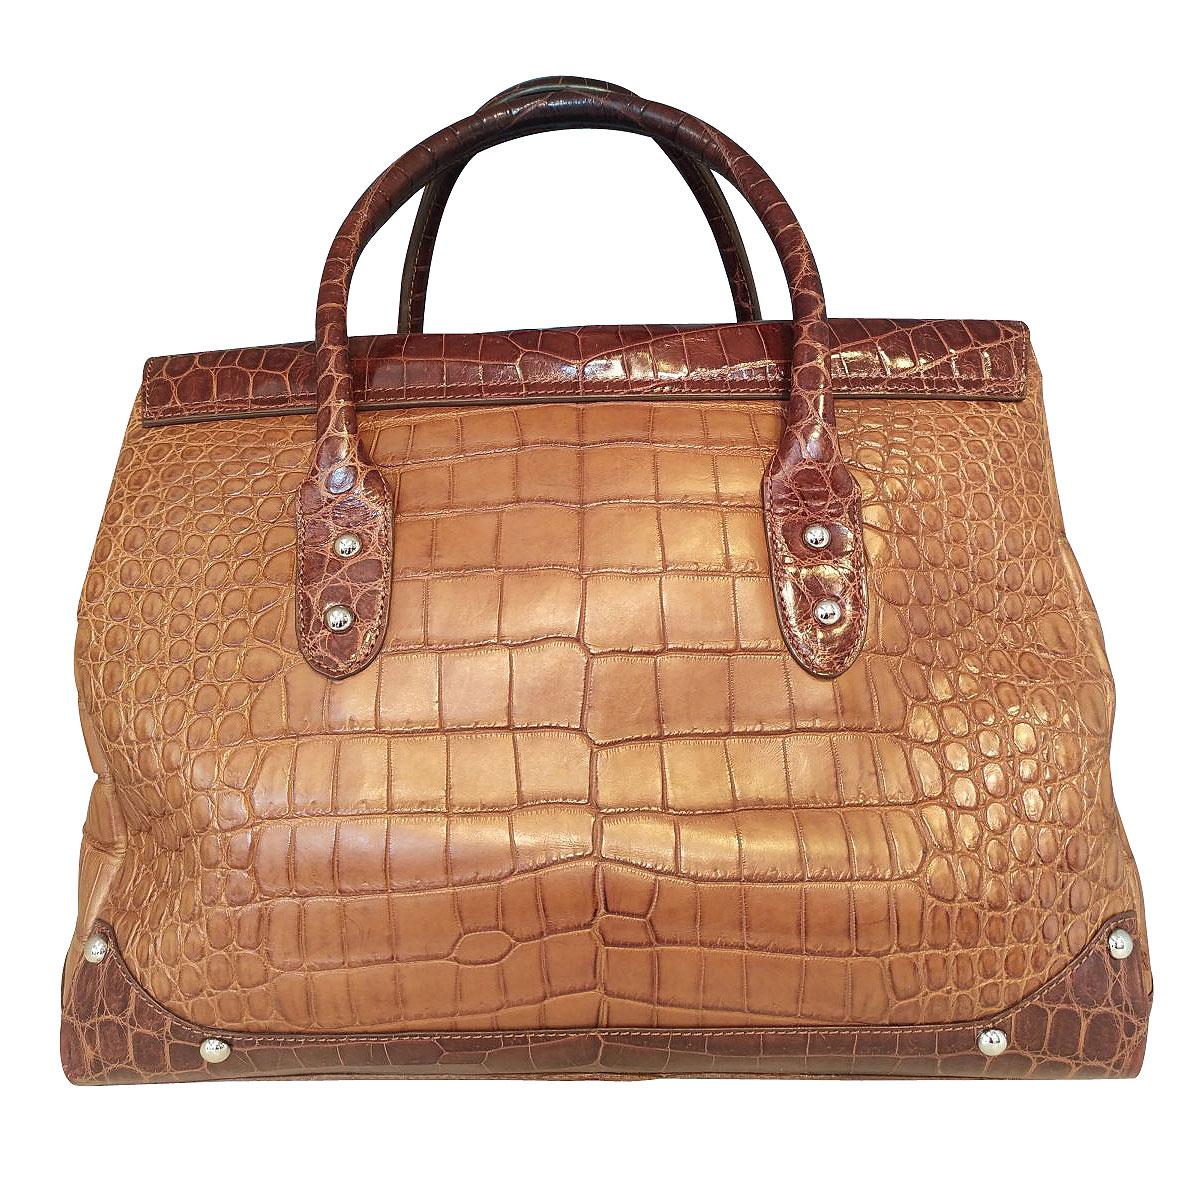 Stunning crocodile bag by Colombo Milano
Real crocodile
Beige and brown color
Two handles
Metal closure with keys
Cm 35 x 28 x 15 (13,77 x 11,02 x 5,90 inches)
With dustbag
Presence of few spots on the outside, see pictures
Original price